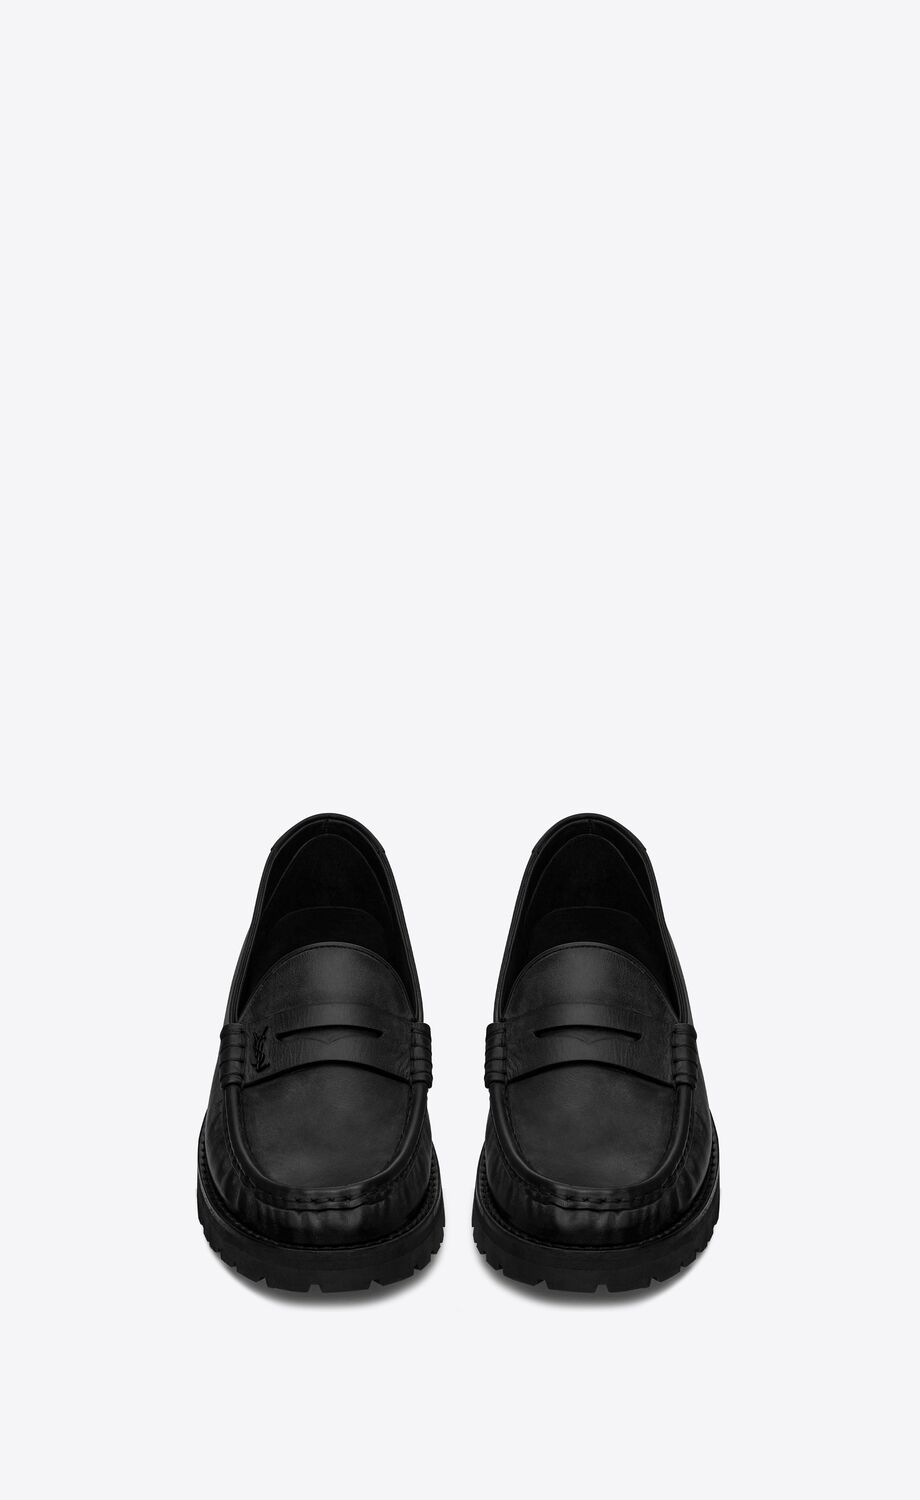 Le Loafer monogram penny slippers in smooth leather | Saint Laurent ...